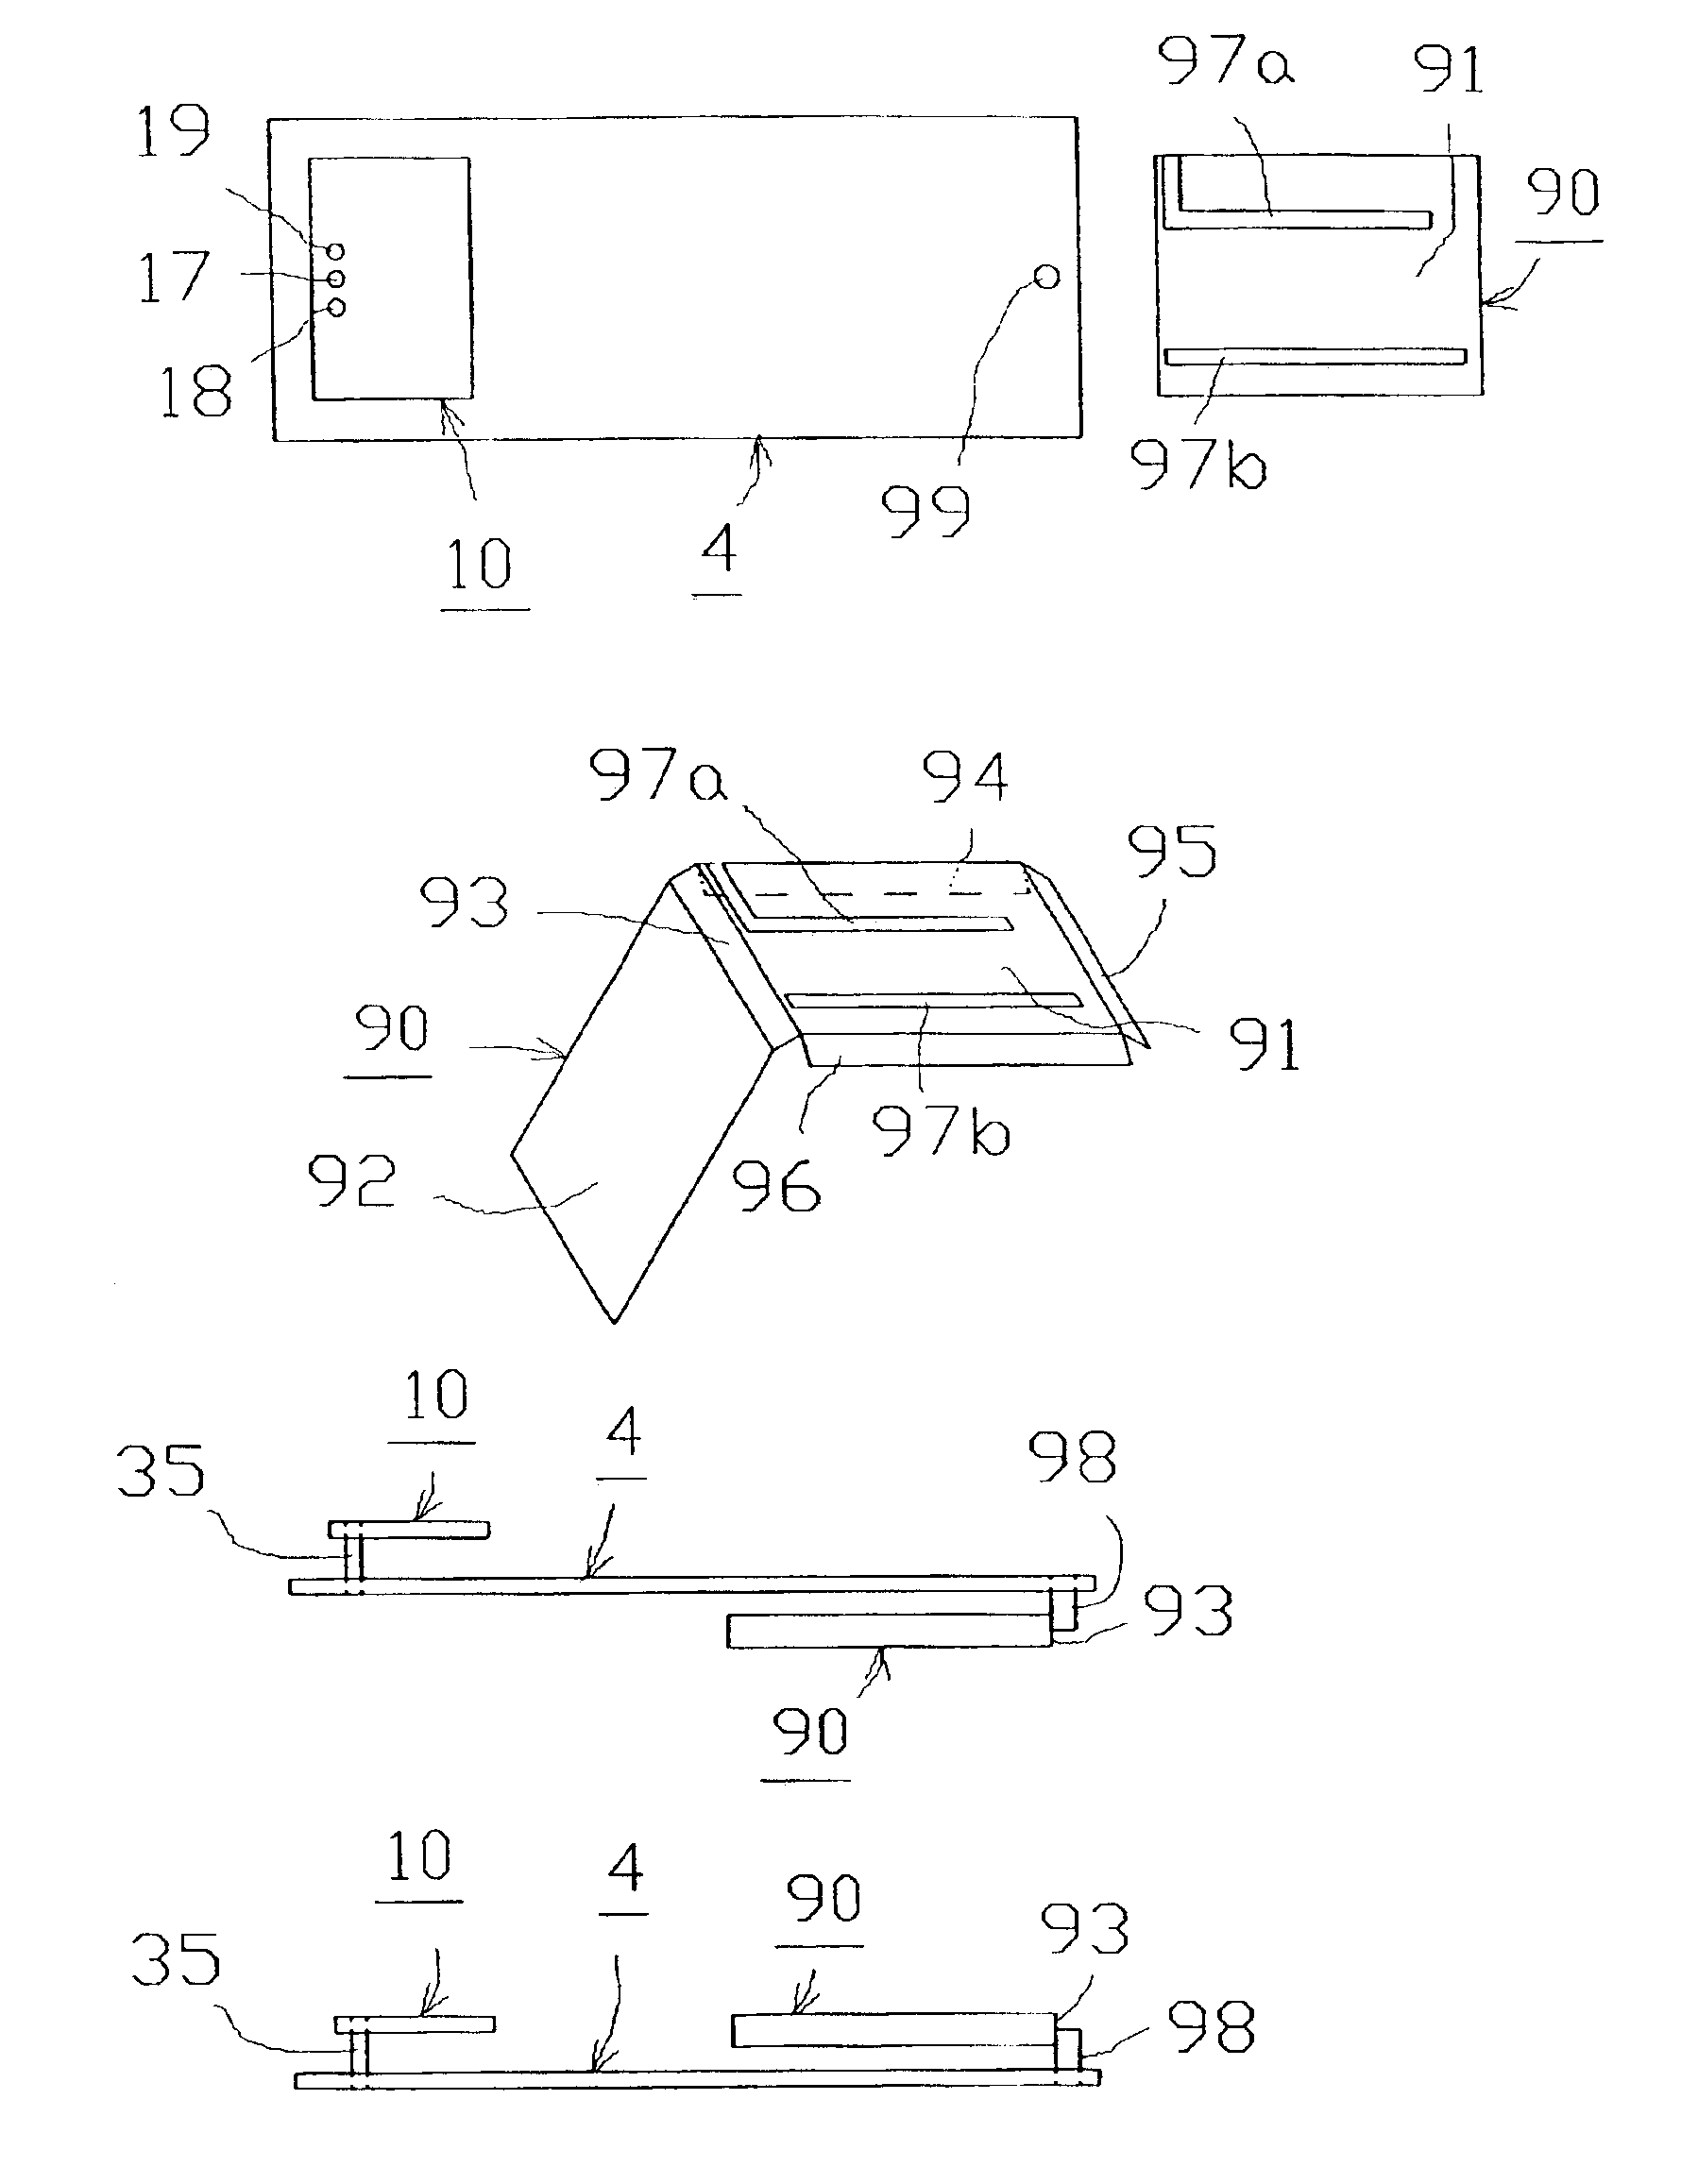 Apparatus and method for enhancing low-frequency operation of mobile communication antennas